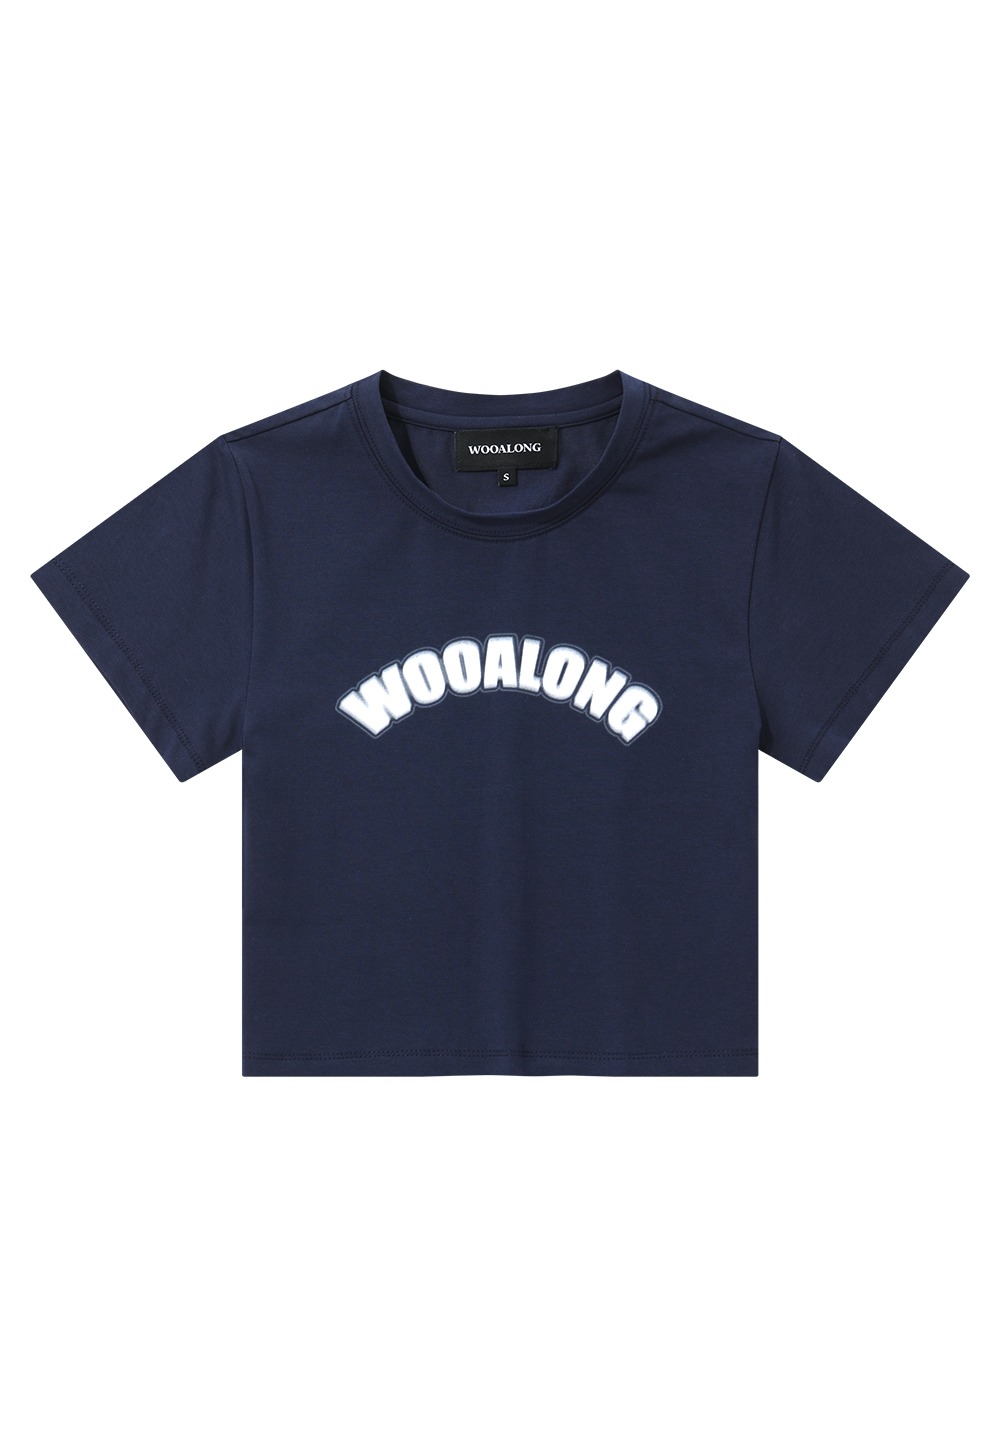 Lettering tight fit crop T - NAVY